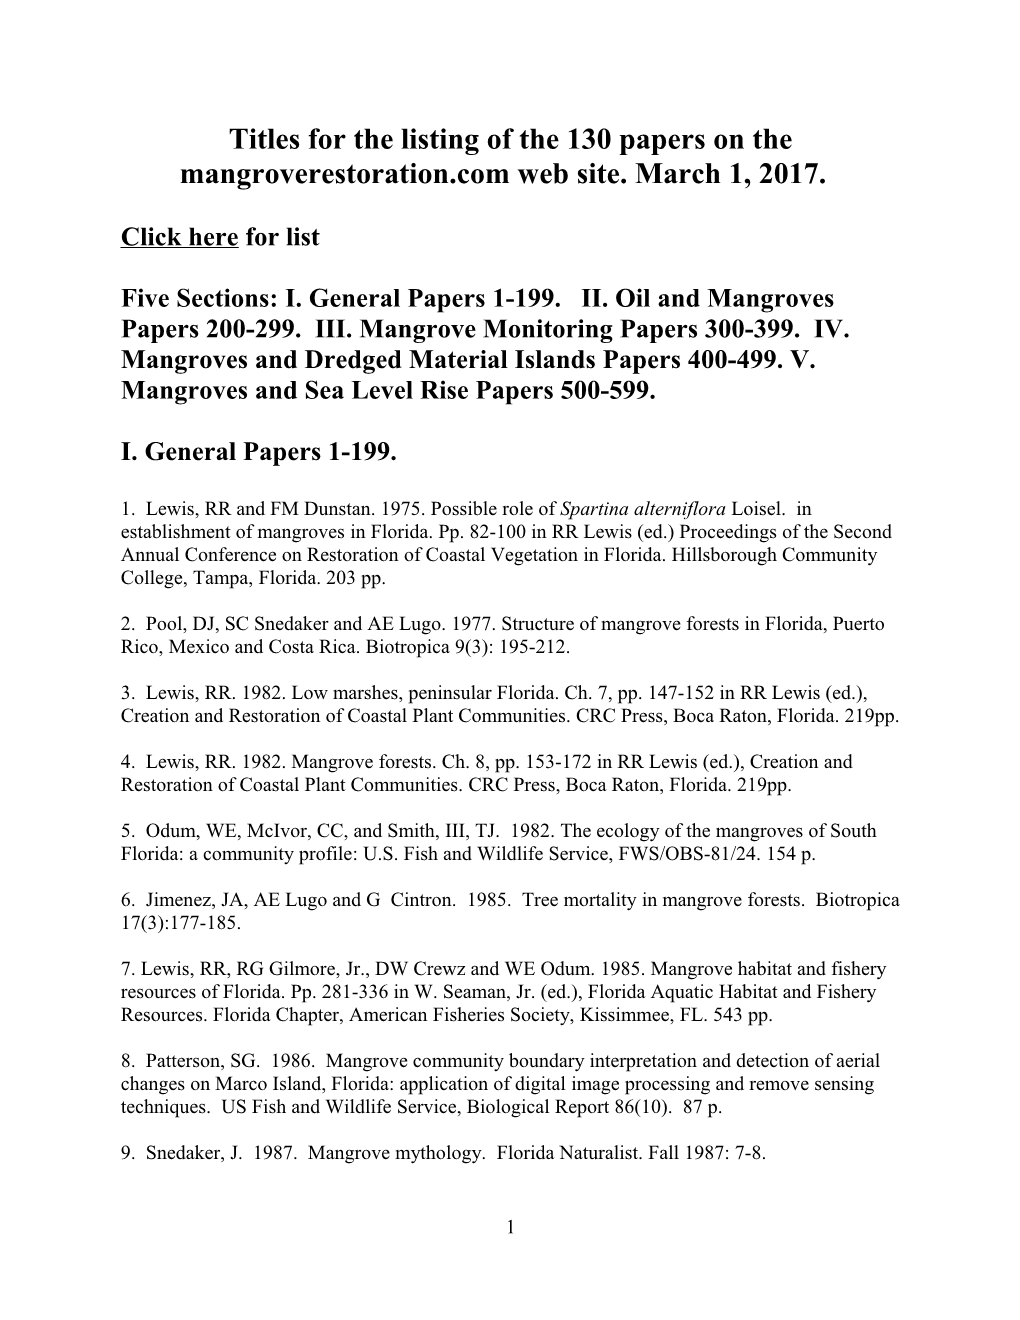 Titles for the Listing of 79 Papers on the Mangroverestoration Web Site